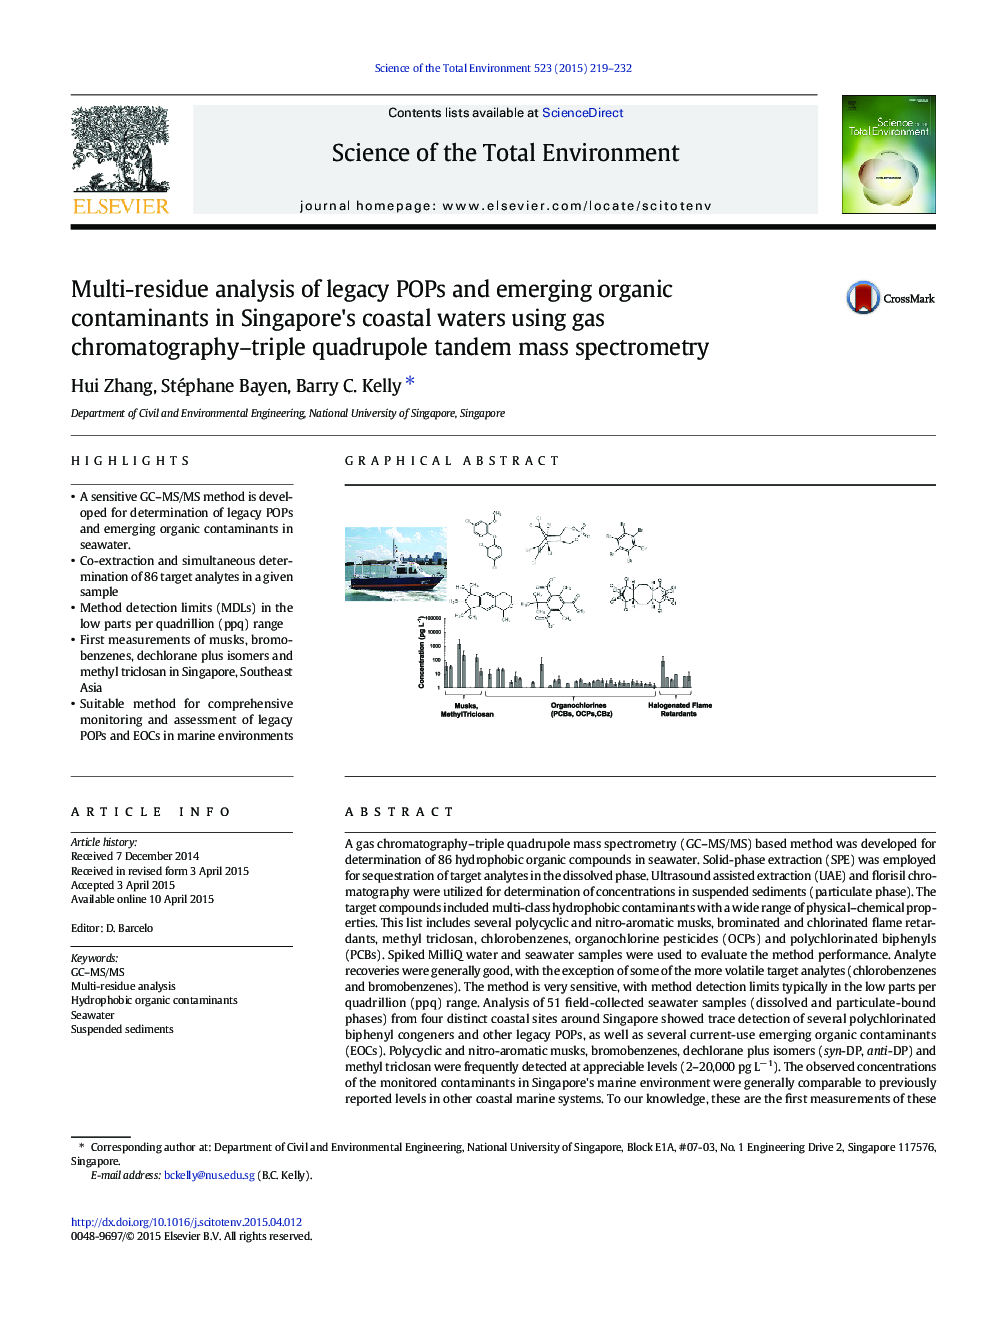 Multi-residue analysis of legacy POPs and emerging organic contaminants in Singapore's coastal waters using gas chromatography–triple quadrupole tandem mass spectrometry